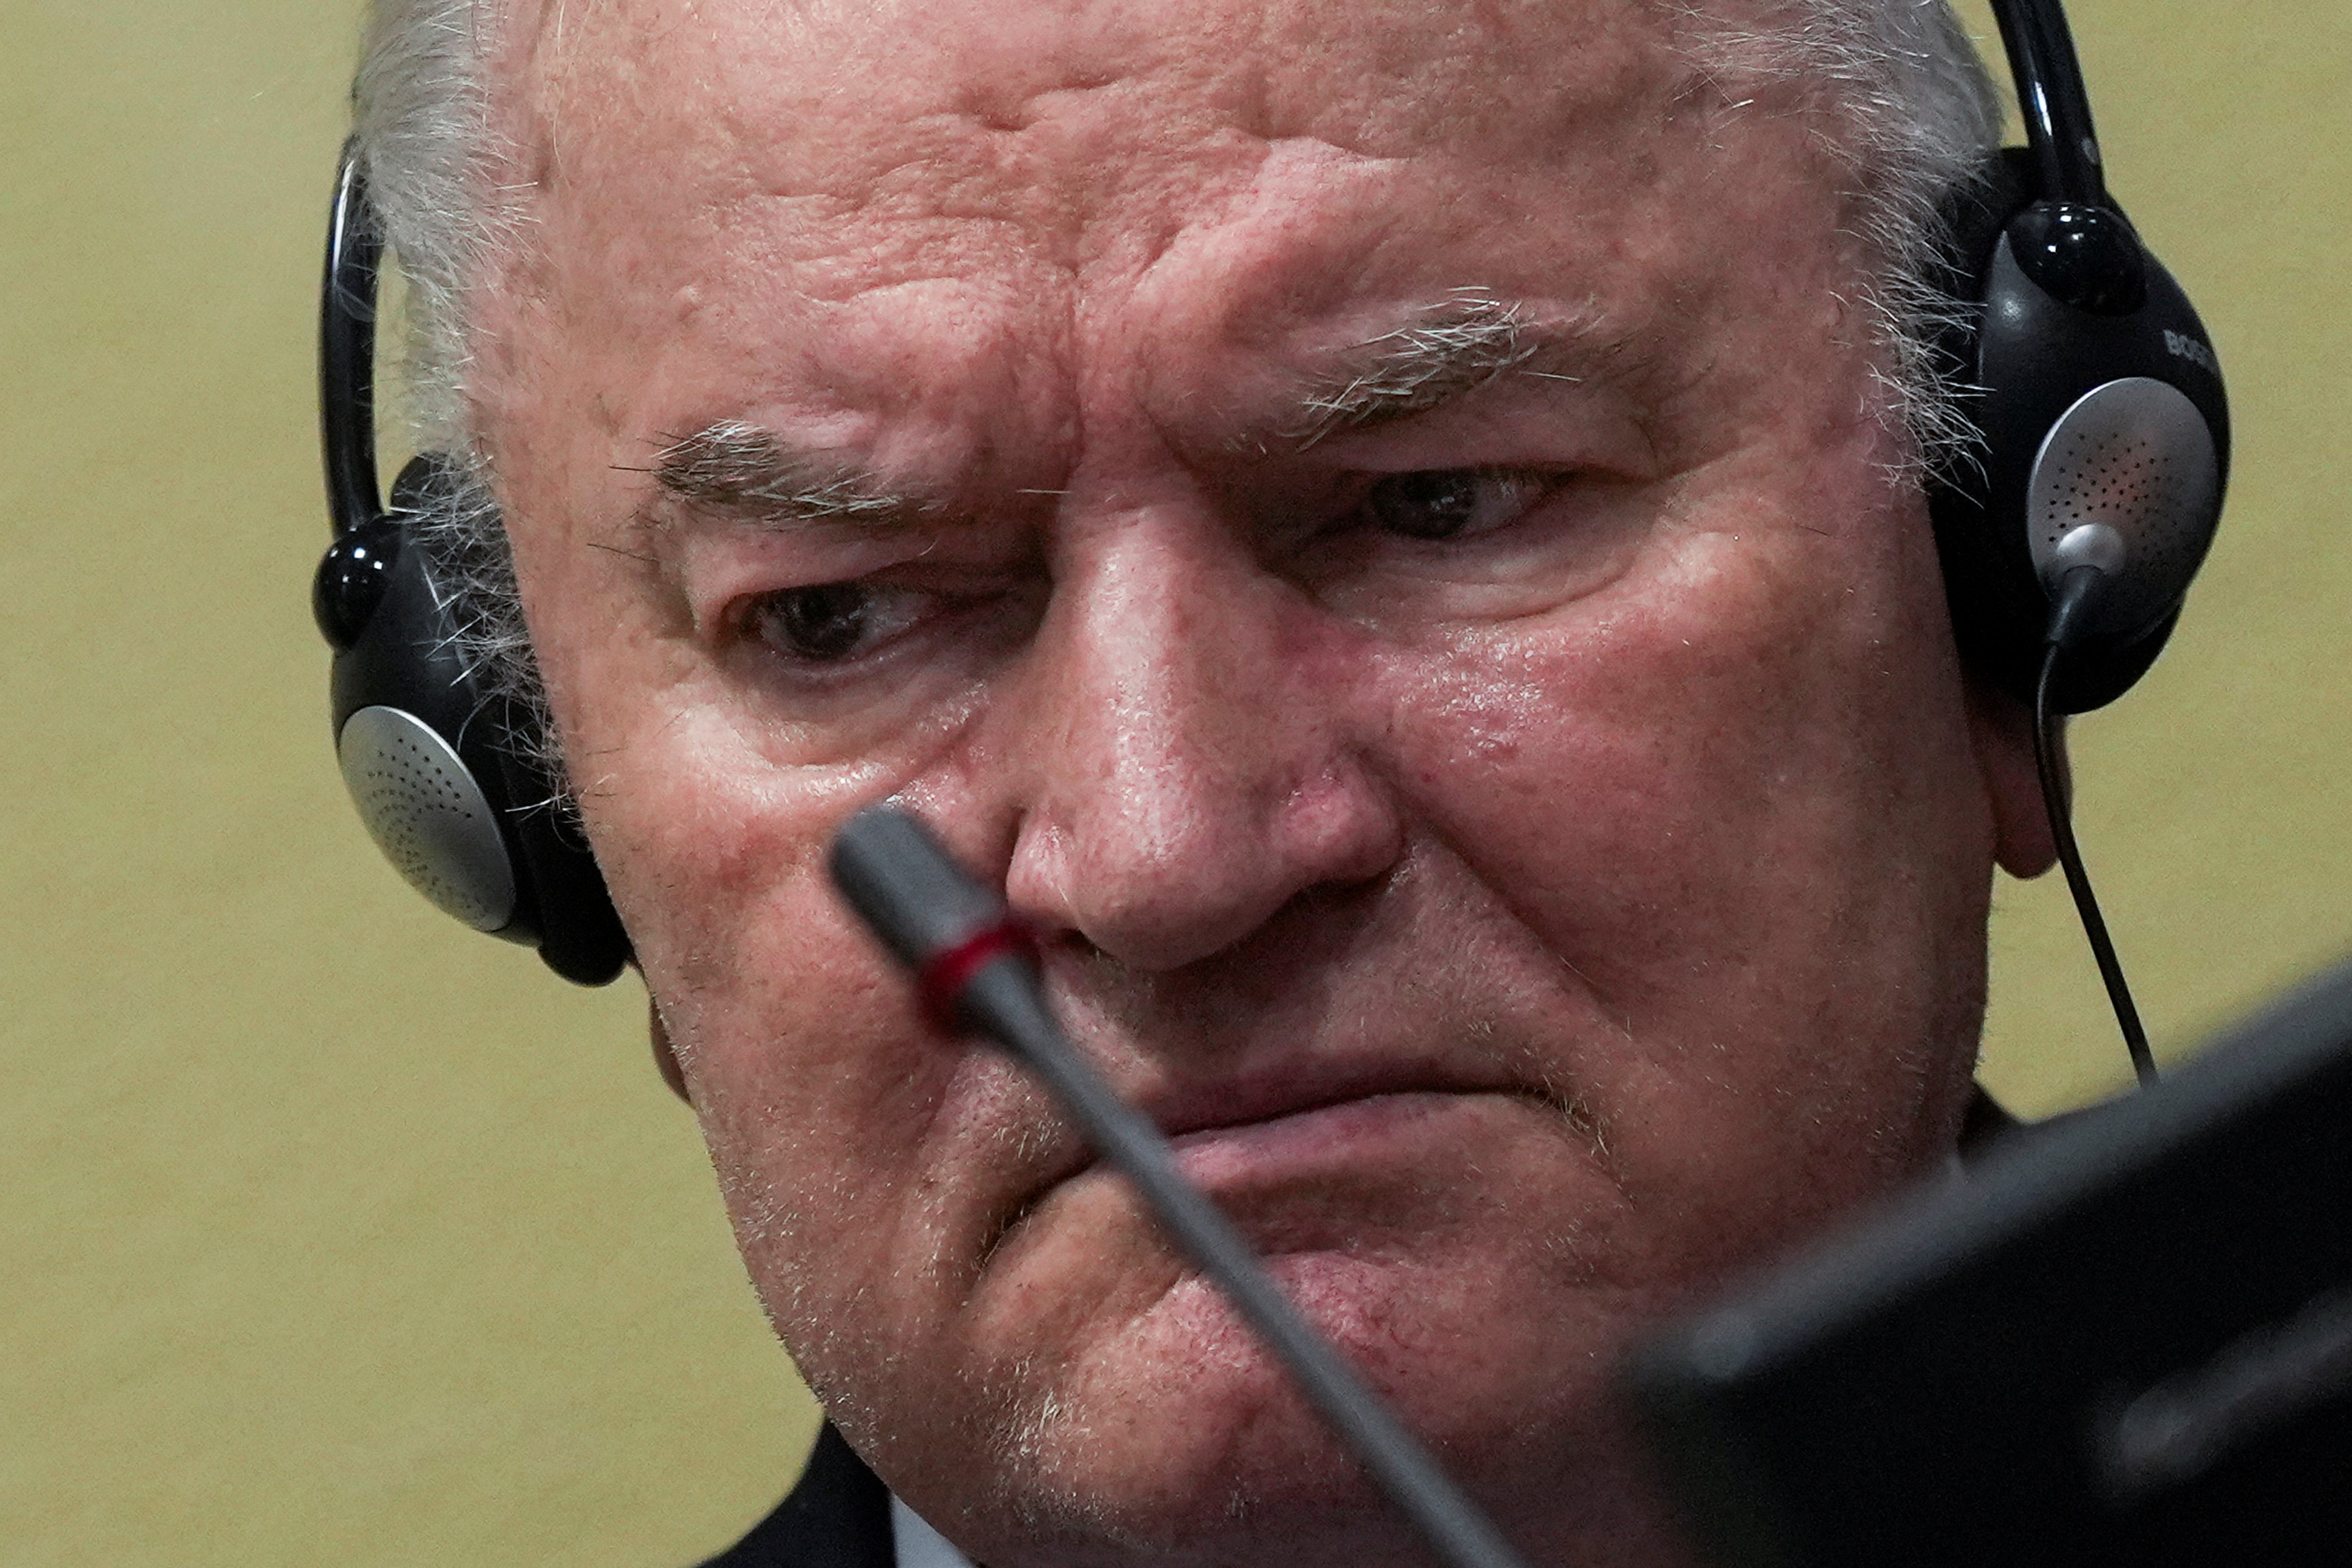 Ratko Mladic sits in the courtroom prior to the pronouncement of his appeal judgement on Tuesday in The Hague